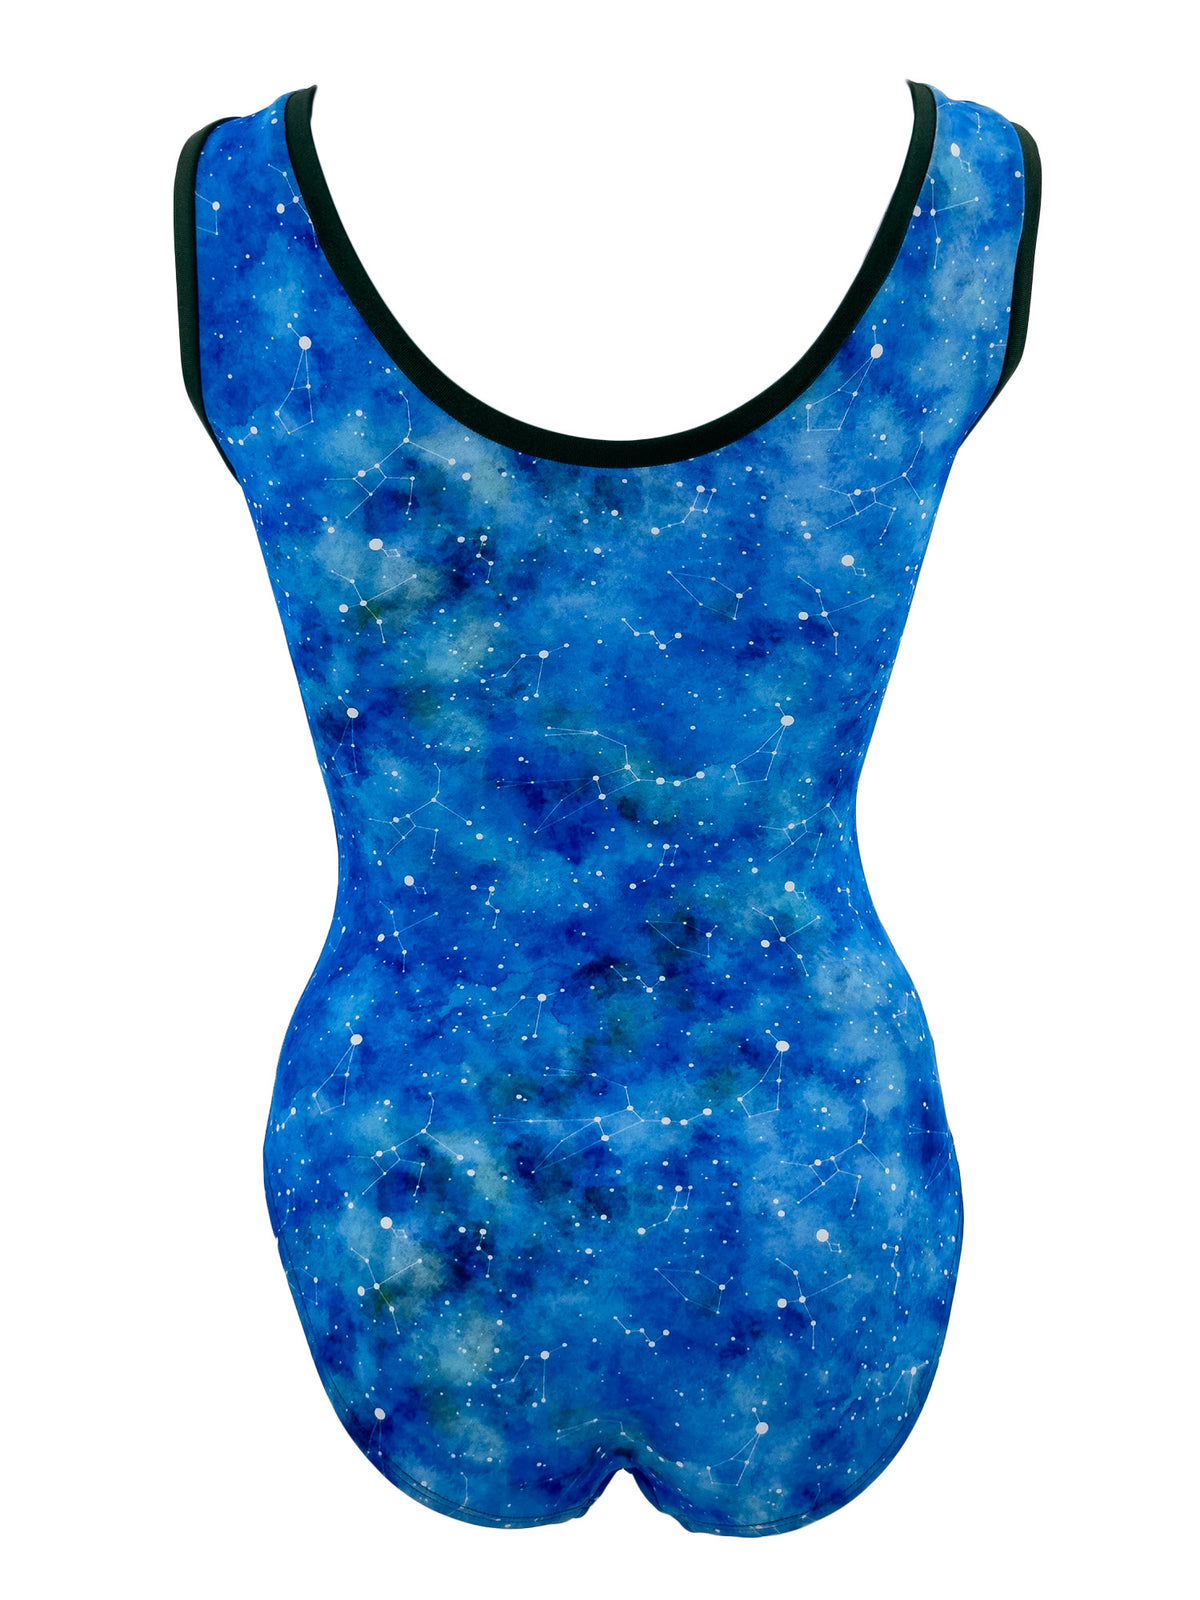 Constellations tank style leotard back view